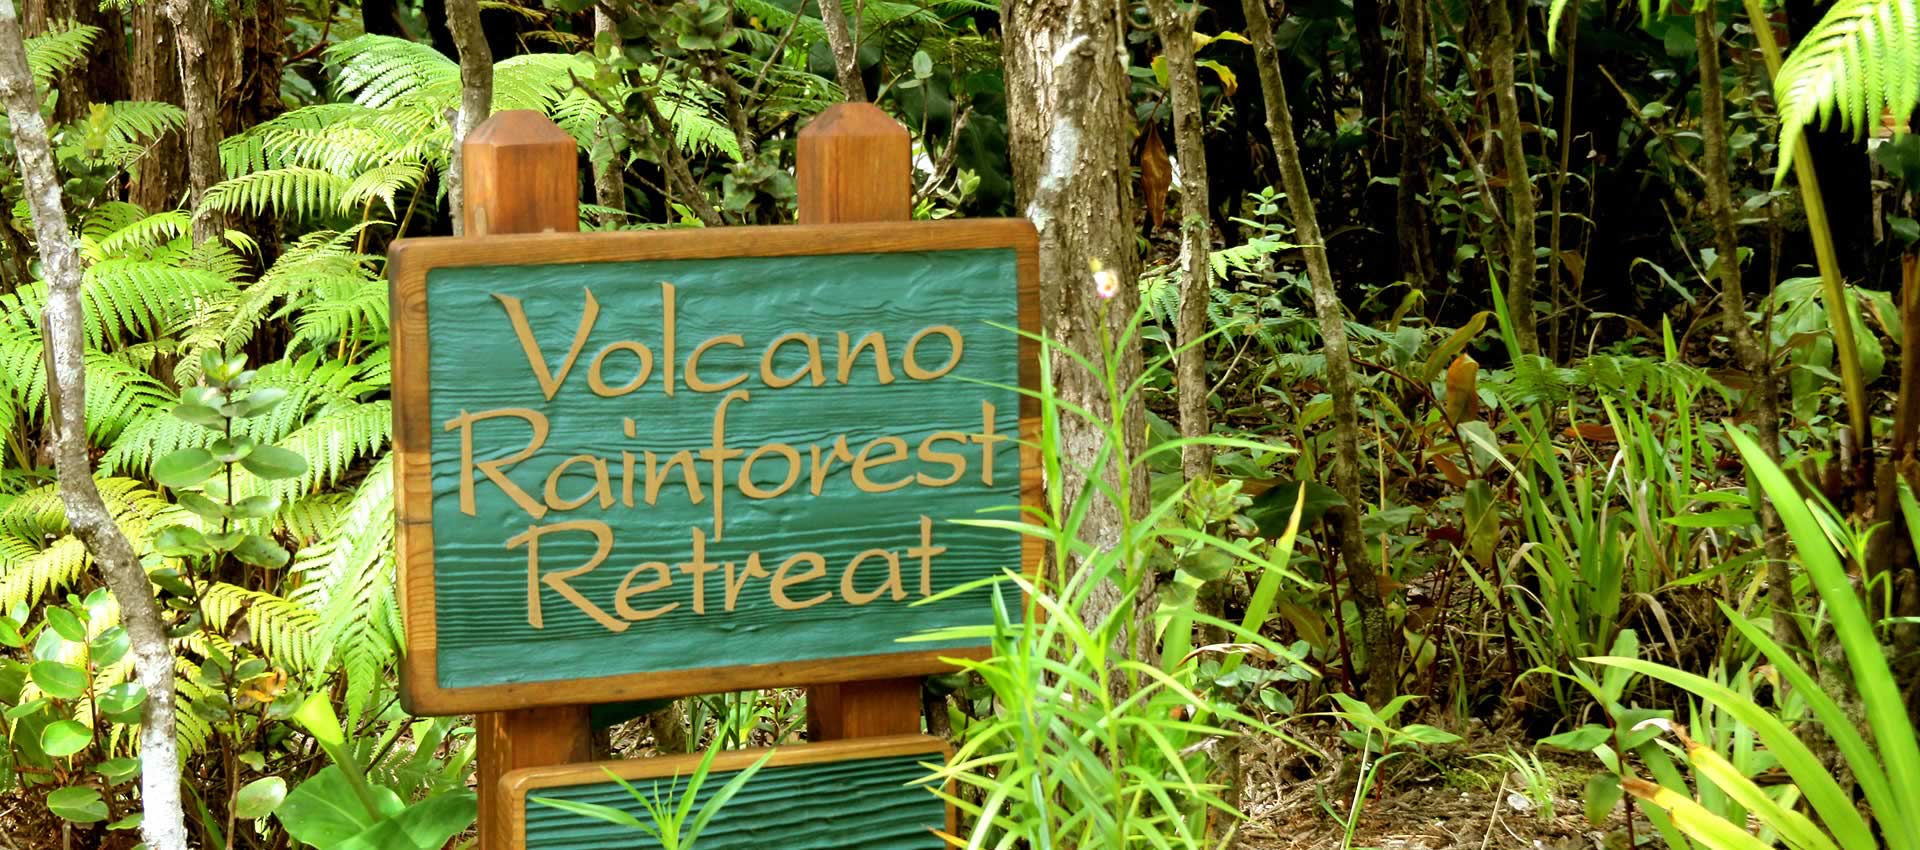 Volcano Rainforest Retreat sign surrounded by tropical ferns